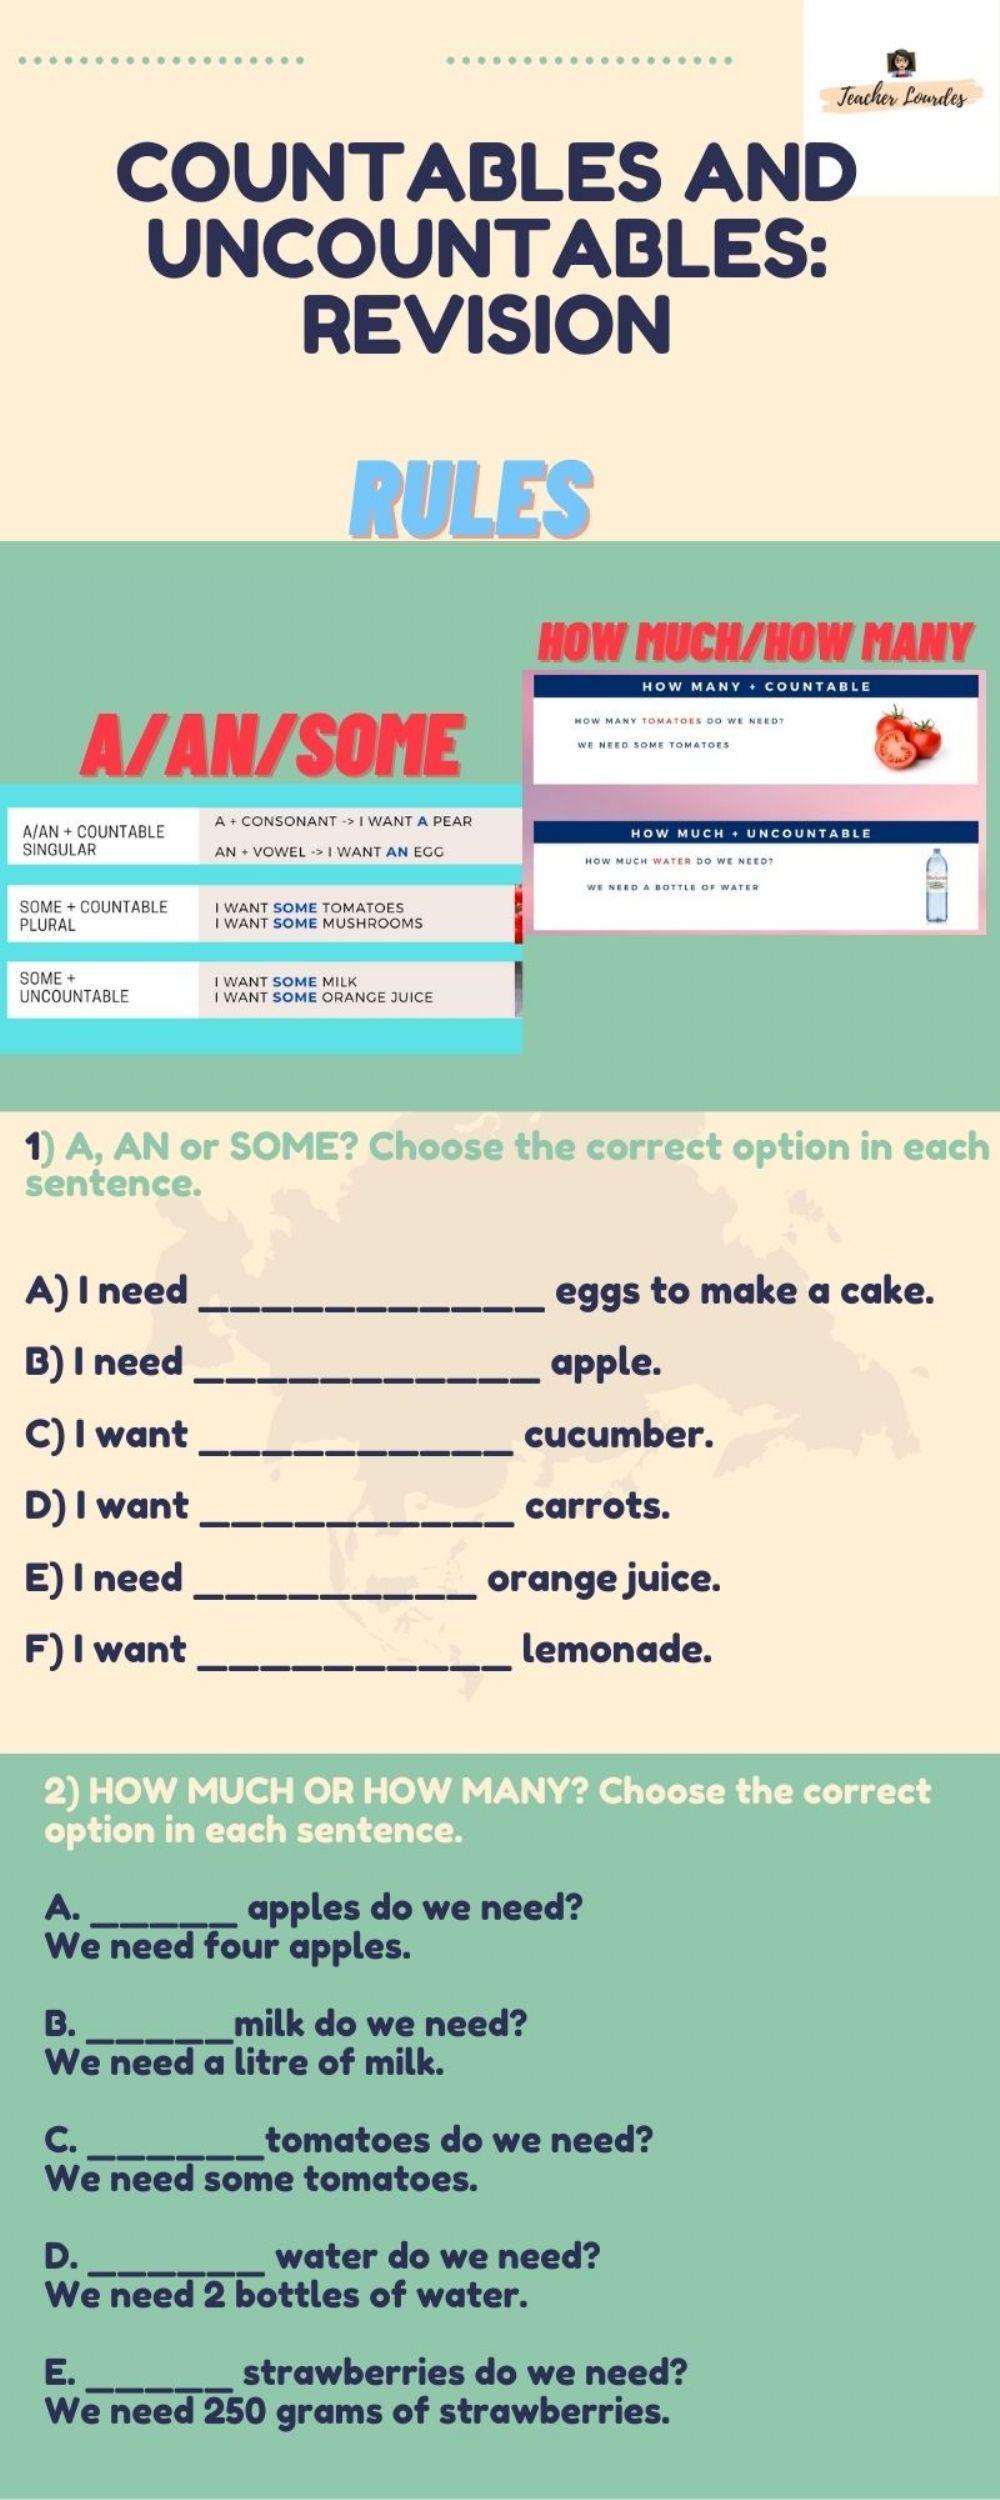 How much-how many- a- an- some - choose the correct option